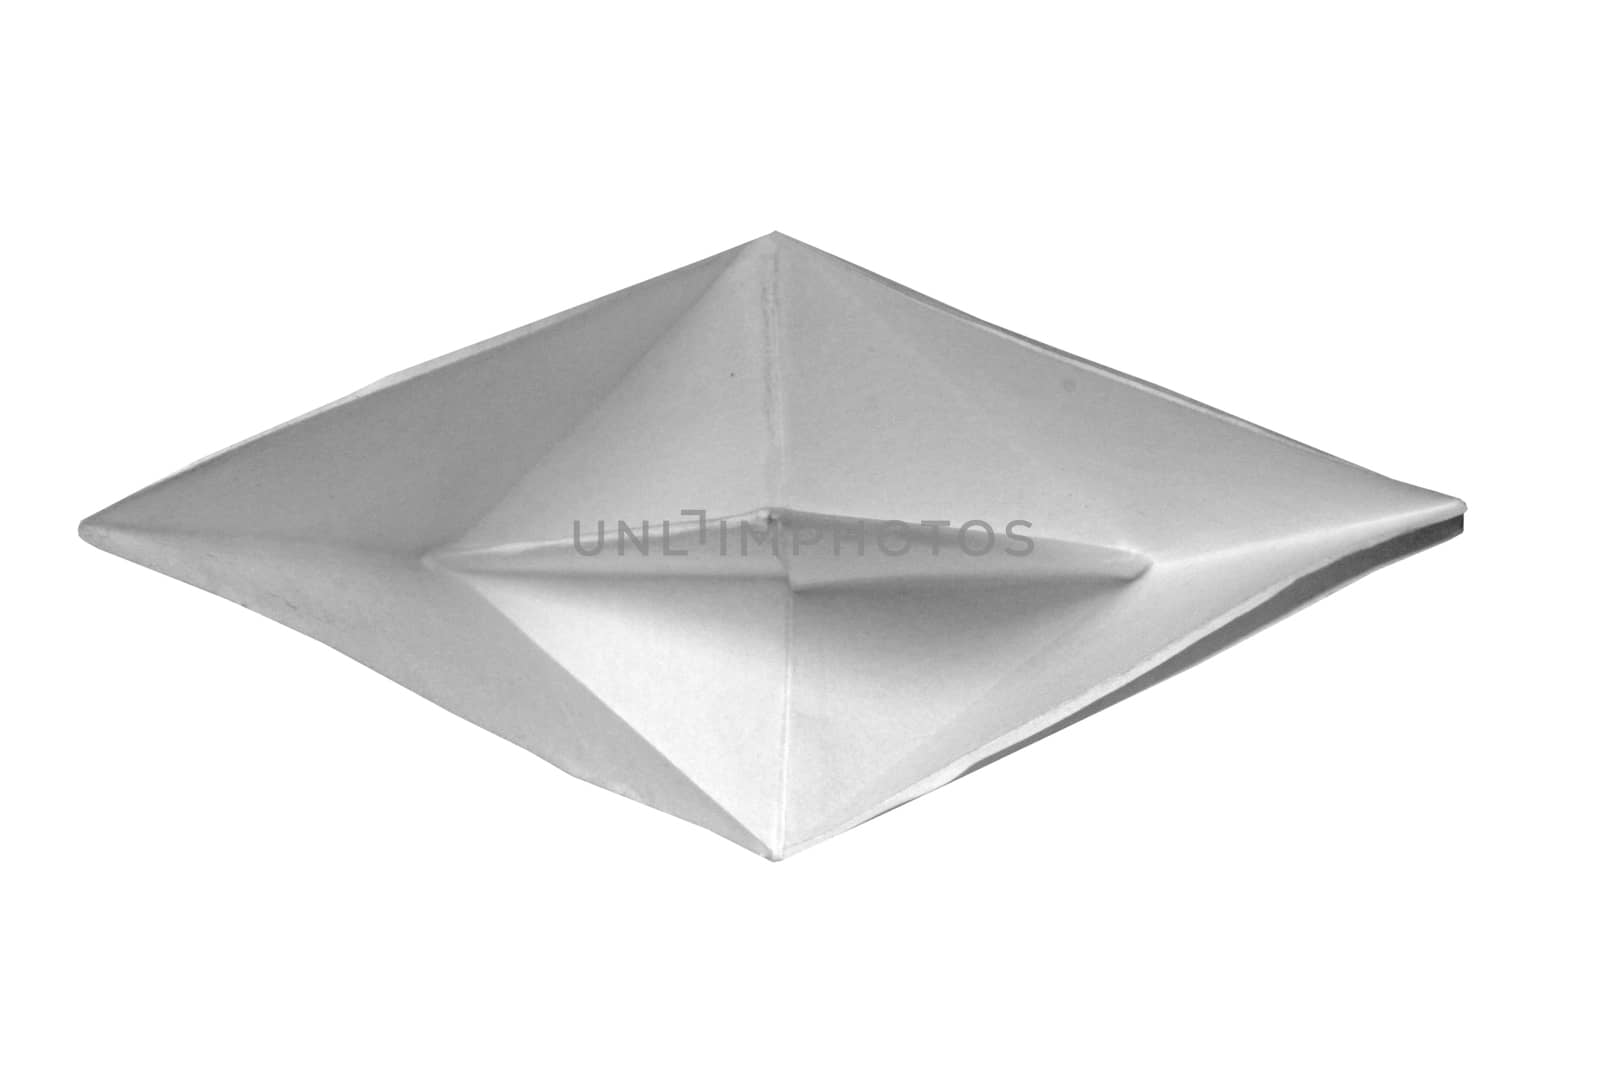 Paper Boat by yands